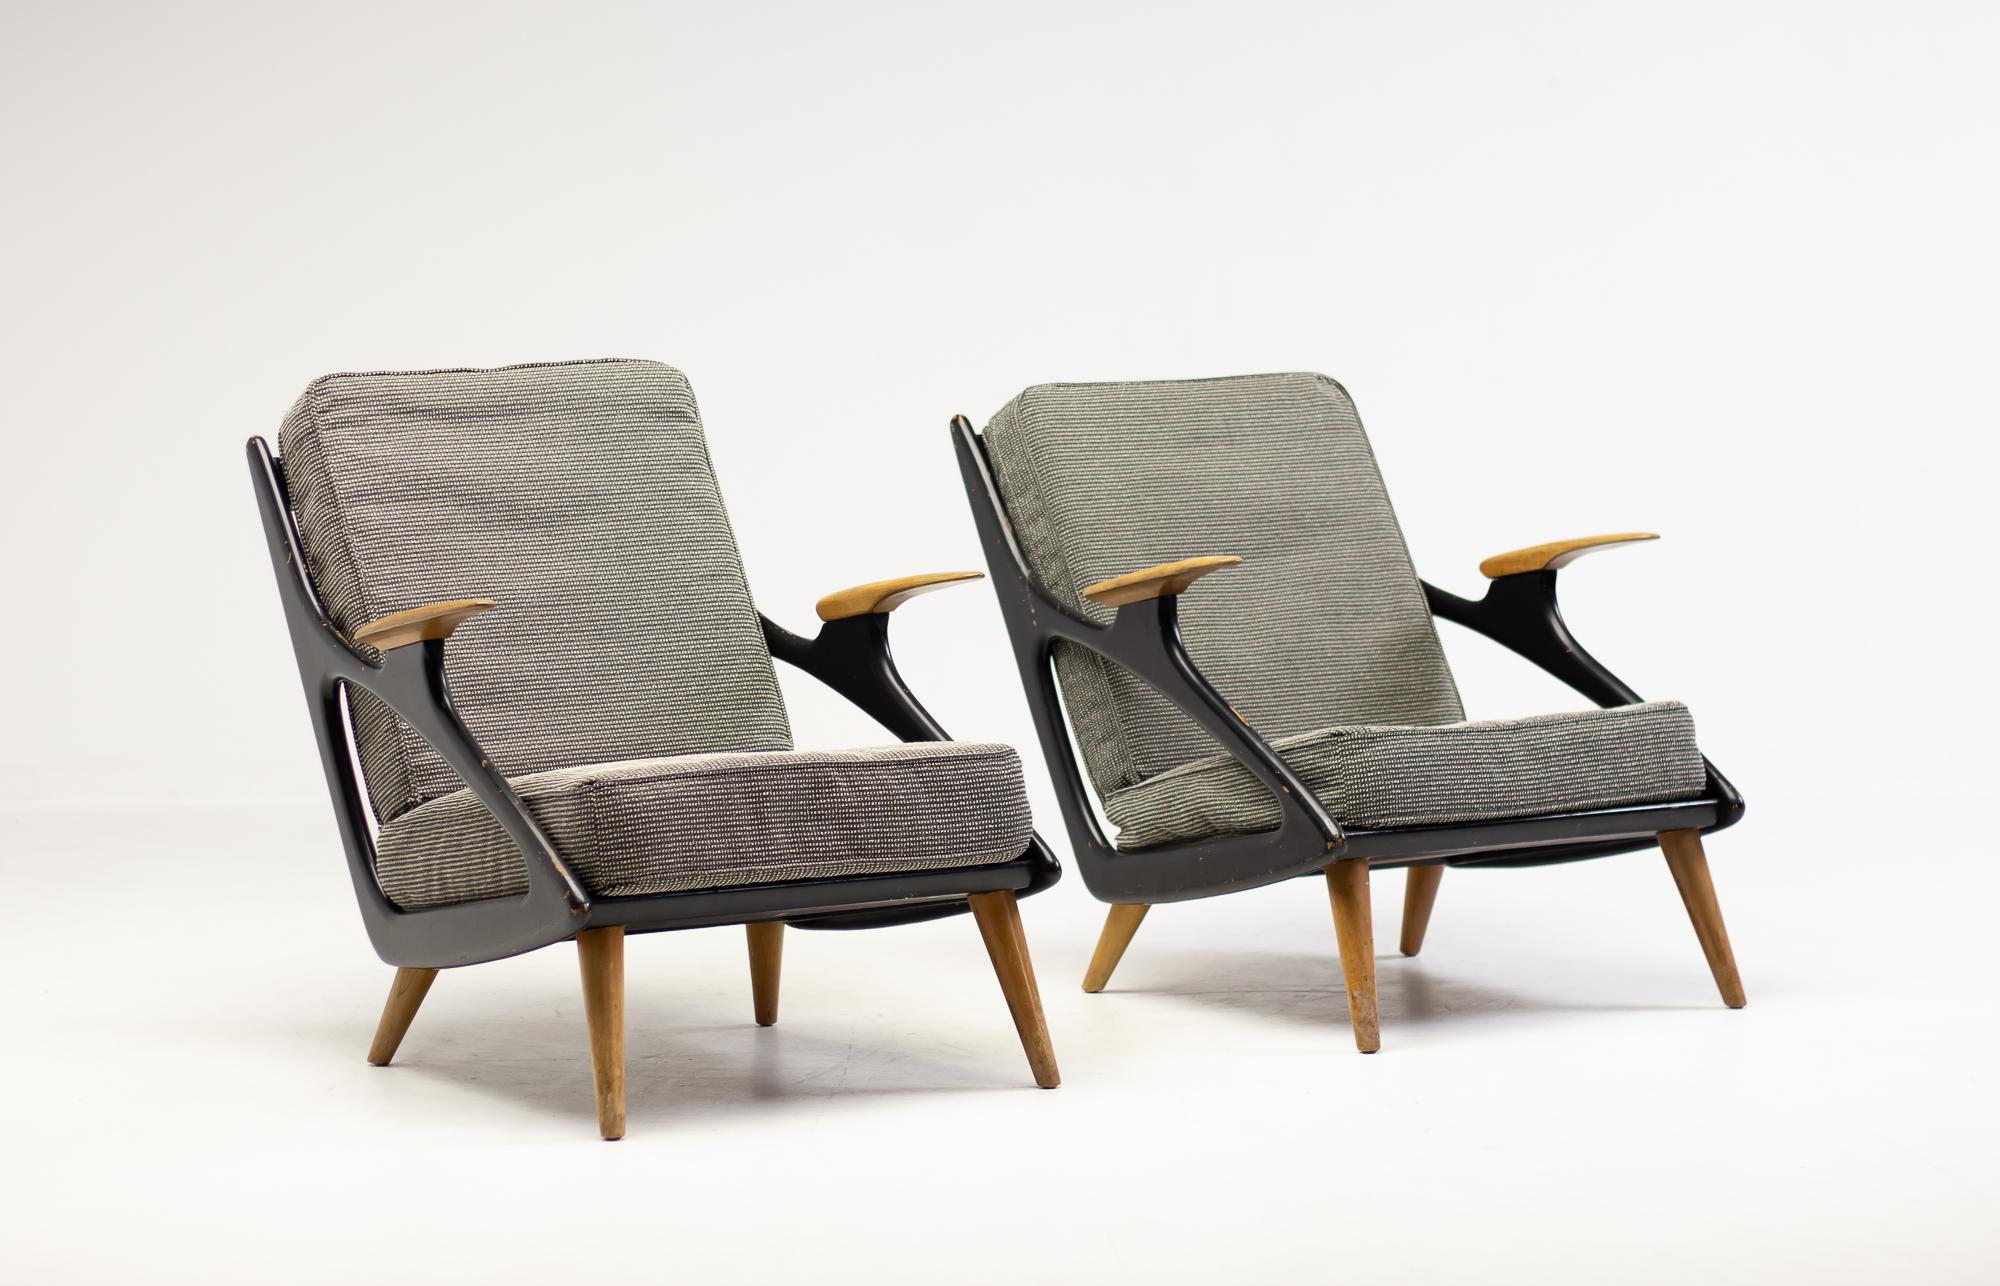 Pair of arm chairs made in Belgium, circa 1950.
Great 1950's design reminiscent of the designs by Jean Prouvé of the same era.
High quality construction of a maple frame that is partially lacquered black, and steel spring cushions.
The upholstery